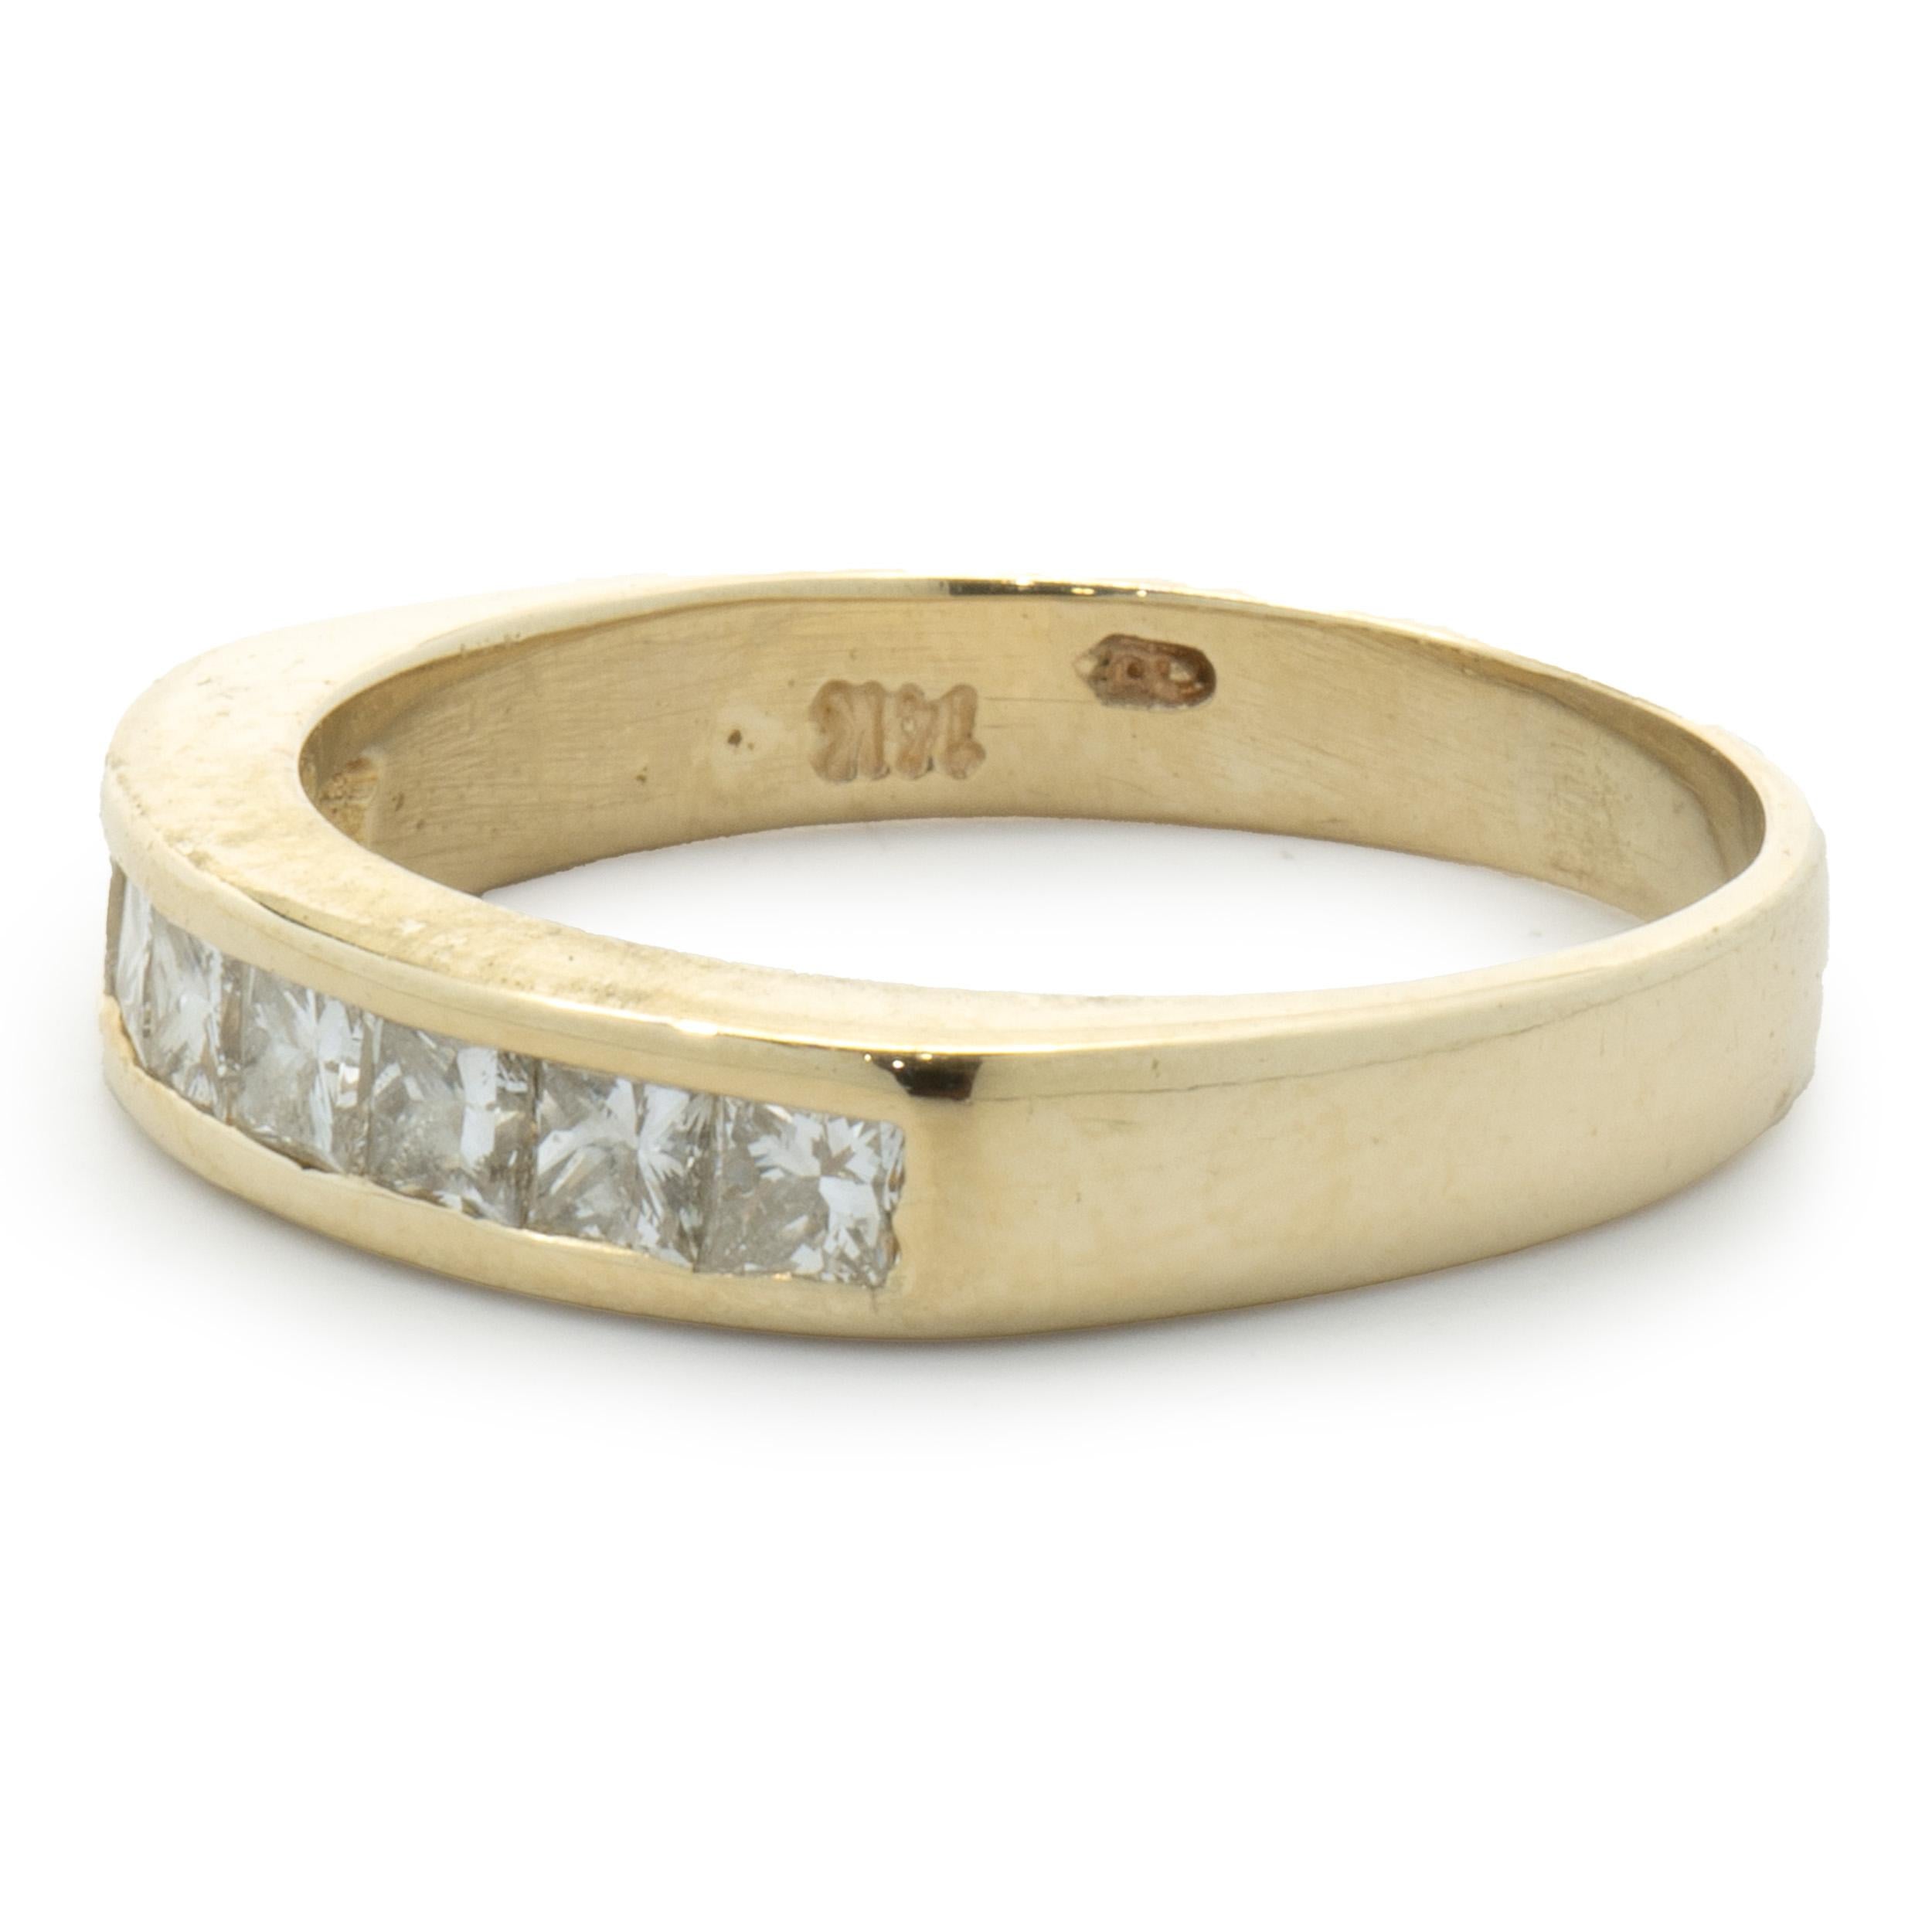 Designer: custom
Material: 14K yellow gold
Diamonds: 8 princess cut = 0.40cttw
Color: H
Clarity: SI1
Size: 5.75 (please allow two additional shipping days for sizing requests)  
Dimensions: ring measures 3.5mm in width
Weight: 2.82 grams